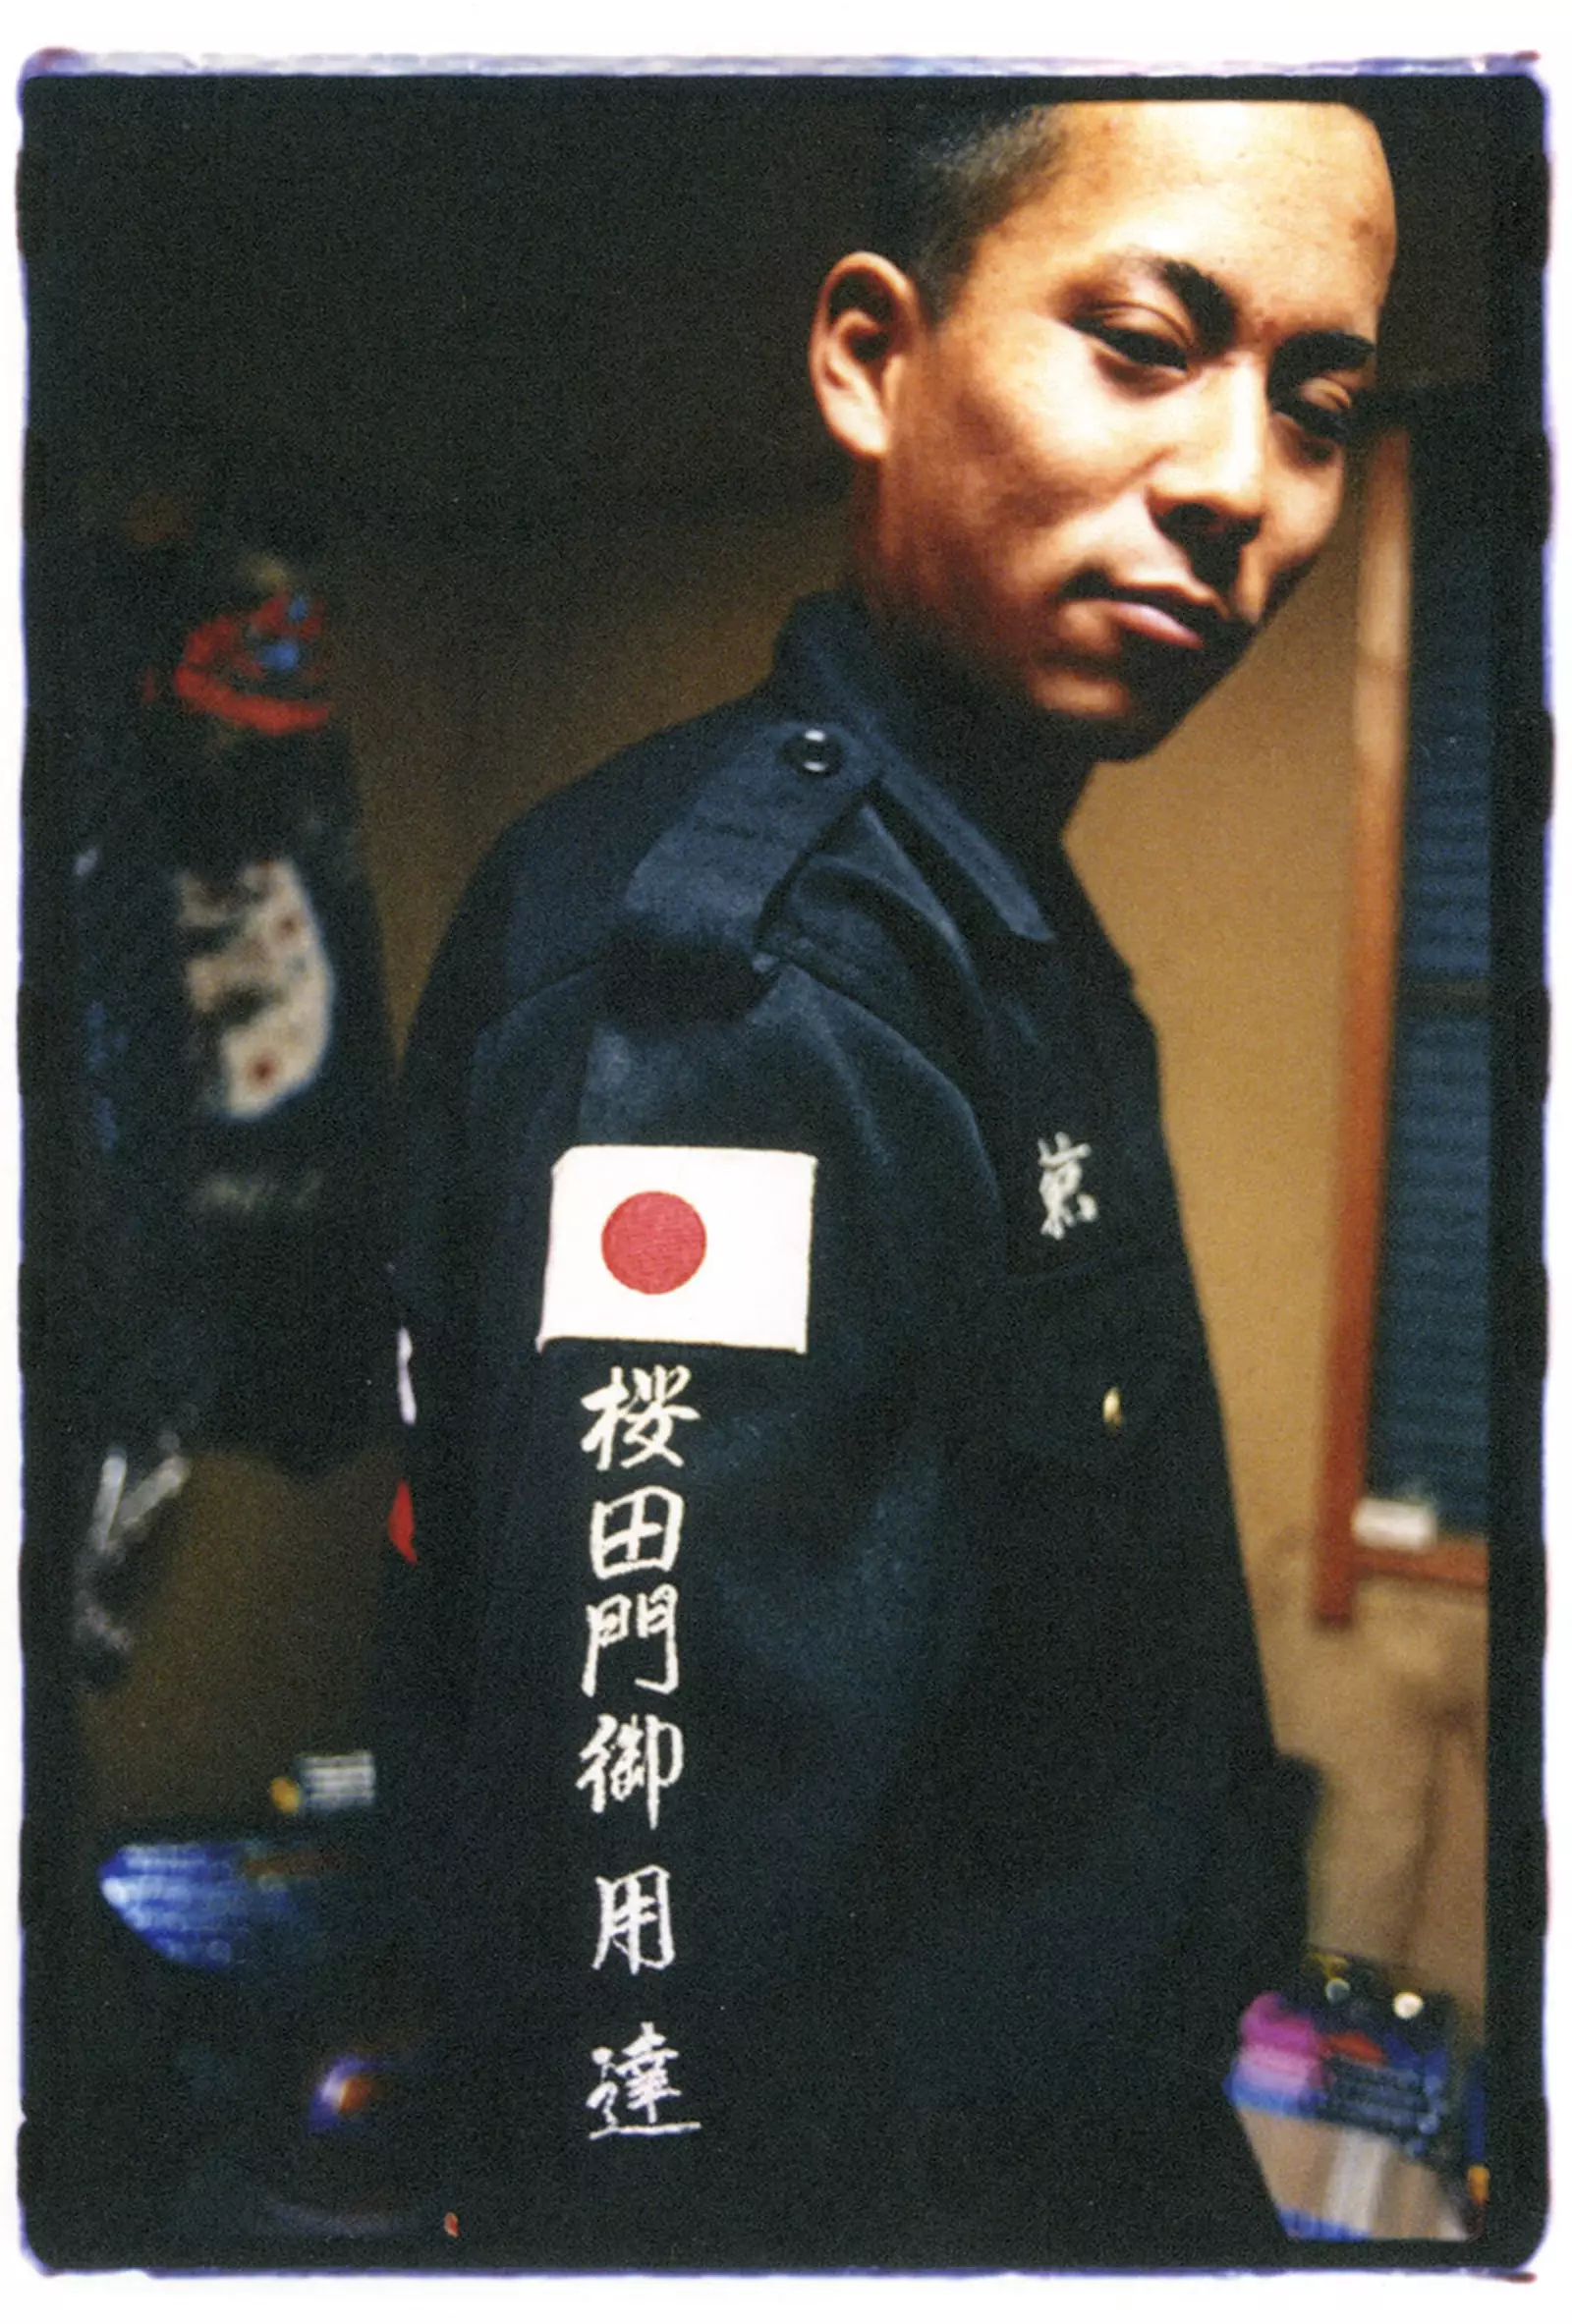 bosozoku-the-stylish-legacy-of-japans-rebel-motorcycle-gangs-4.png